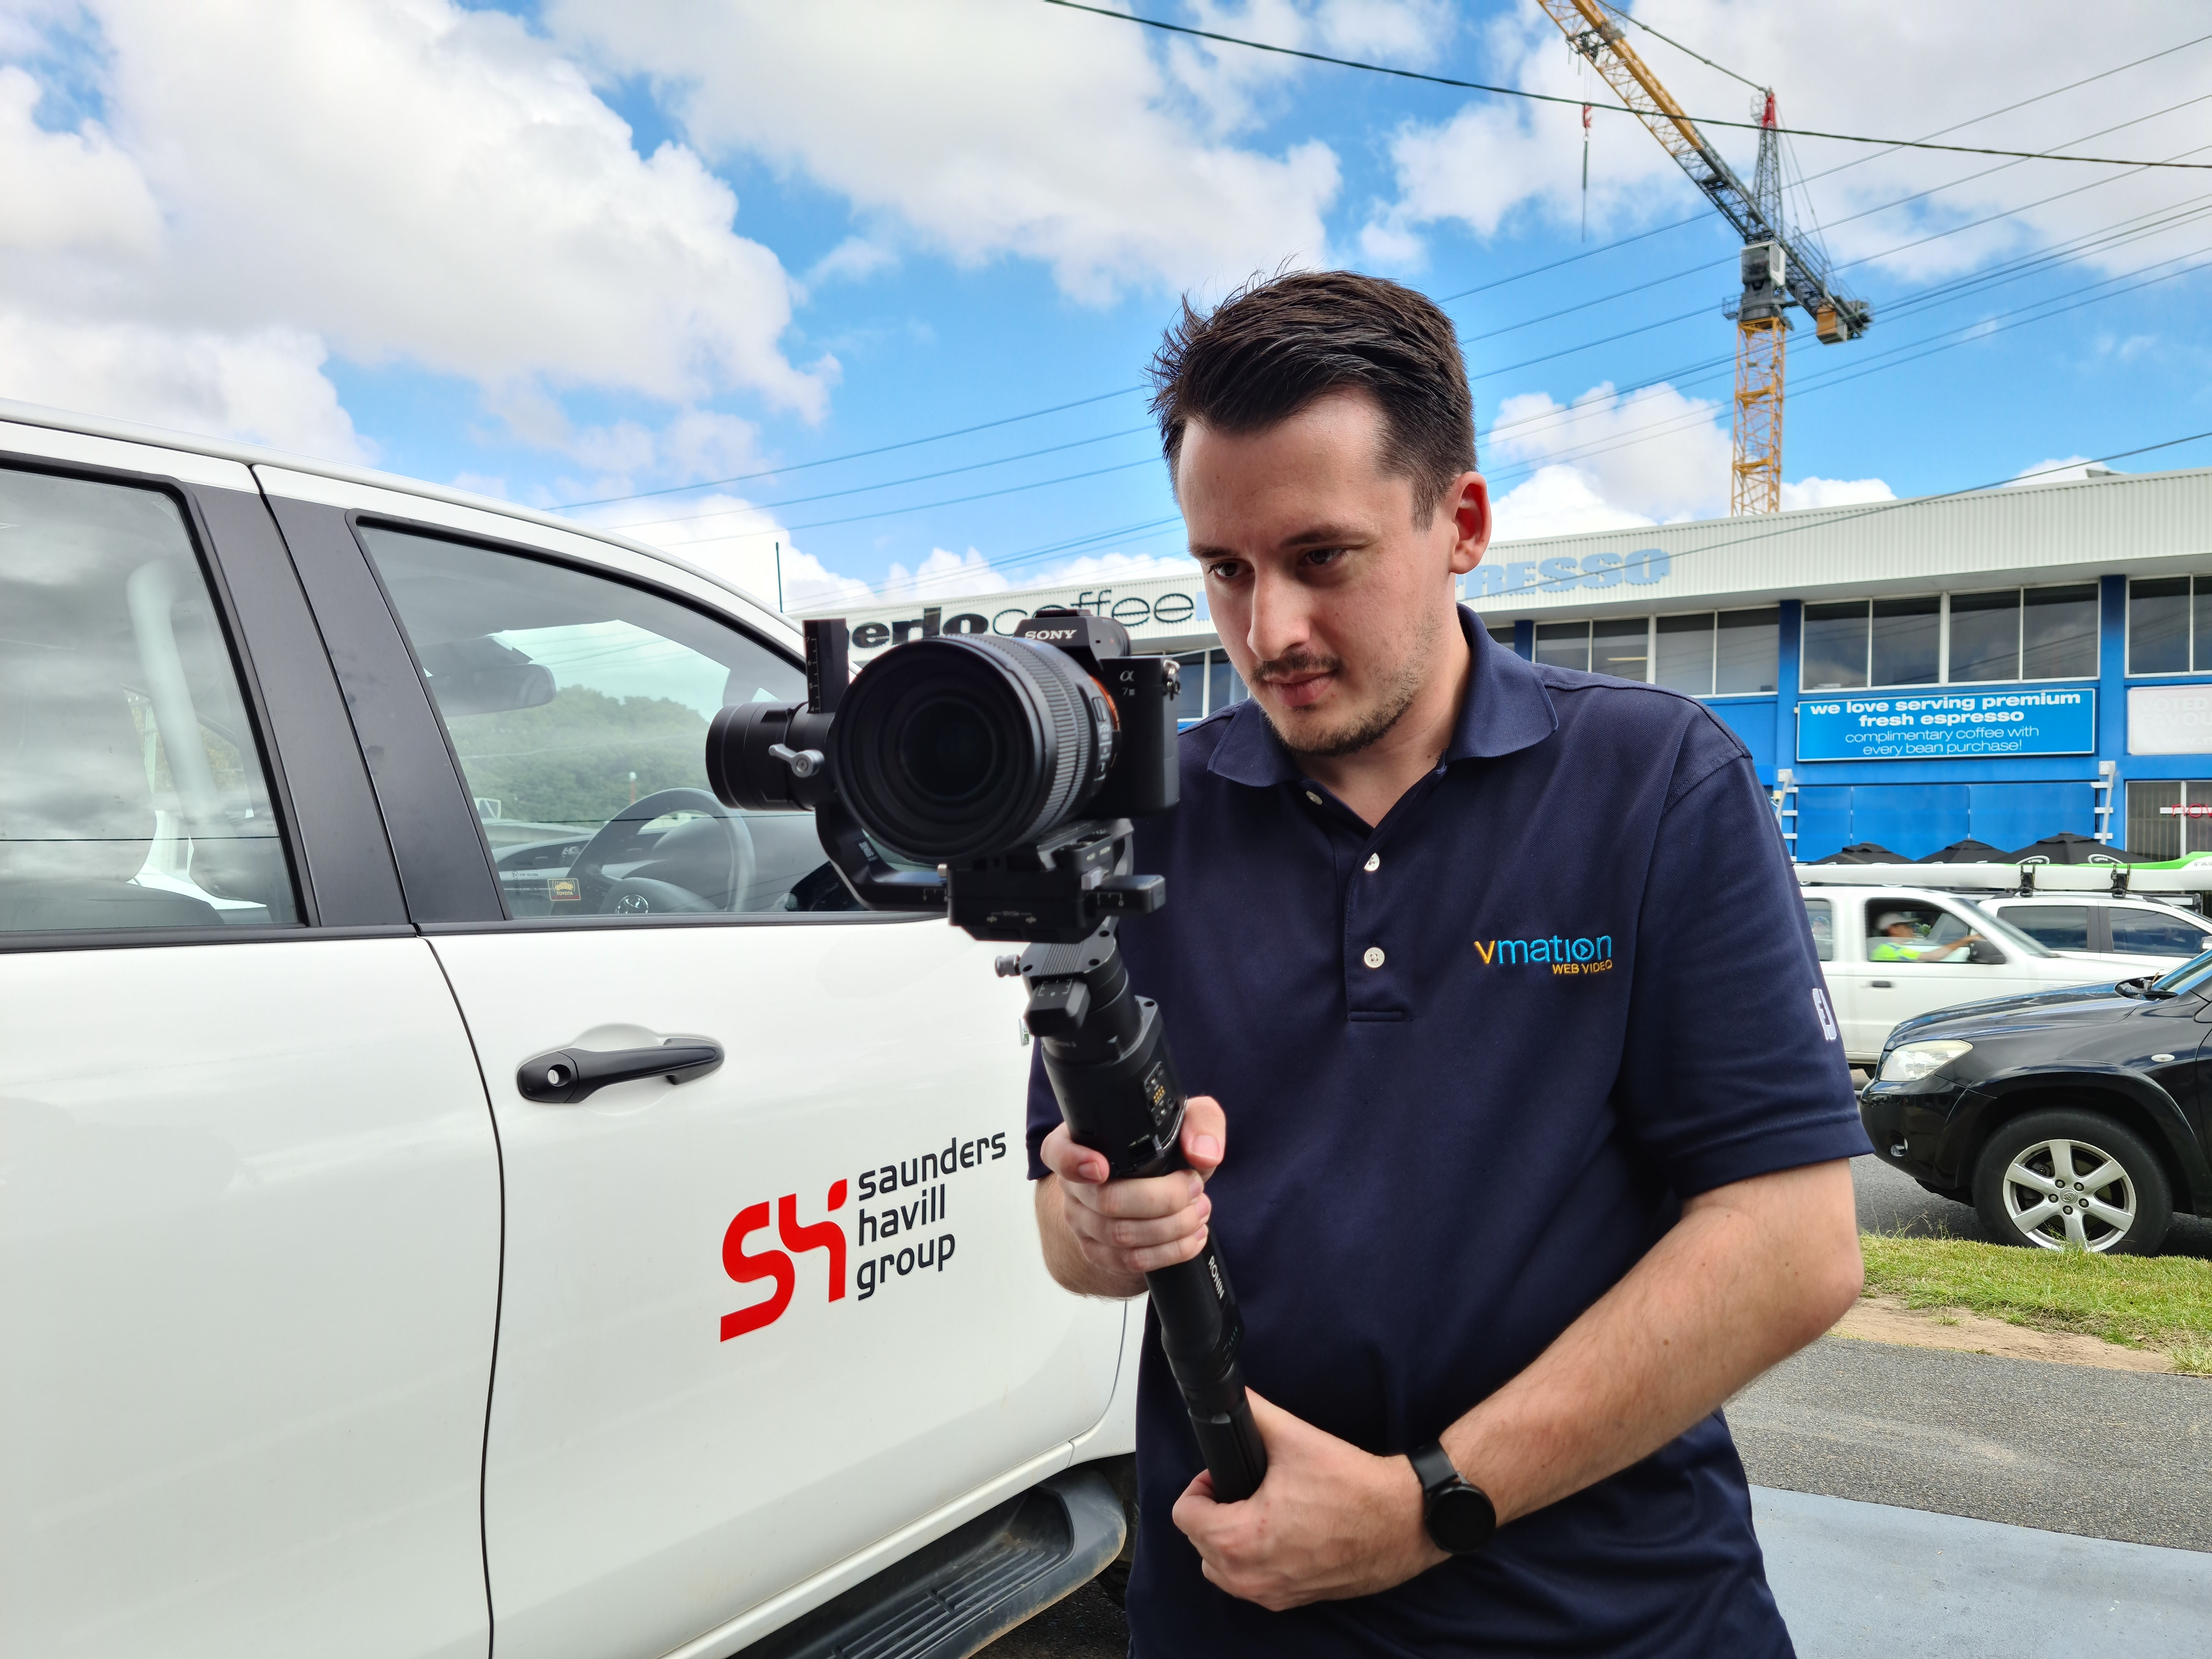 Location Filming | Video Solutions | Corporate Video